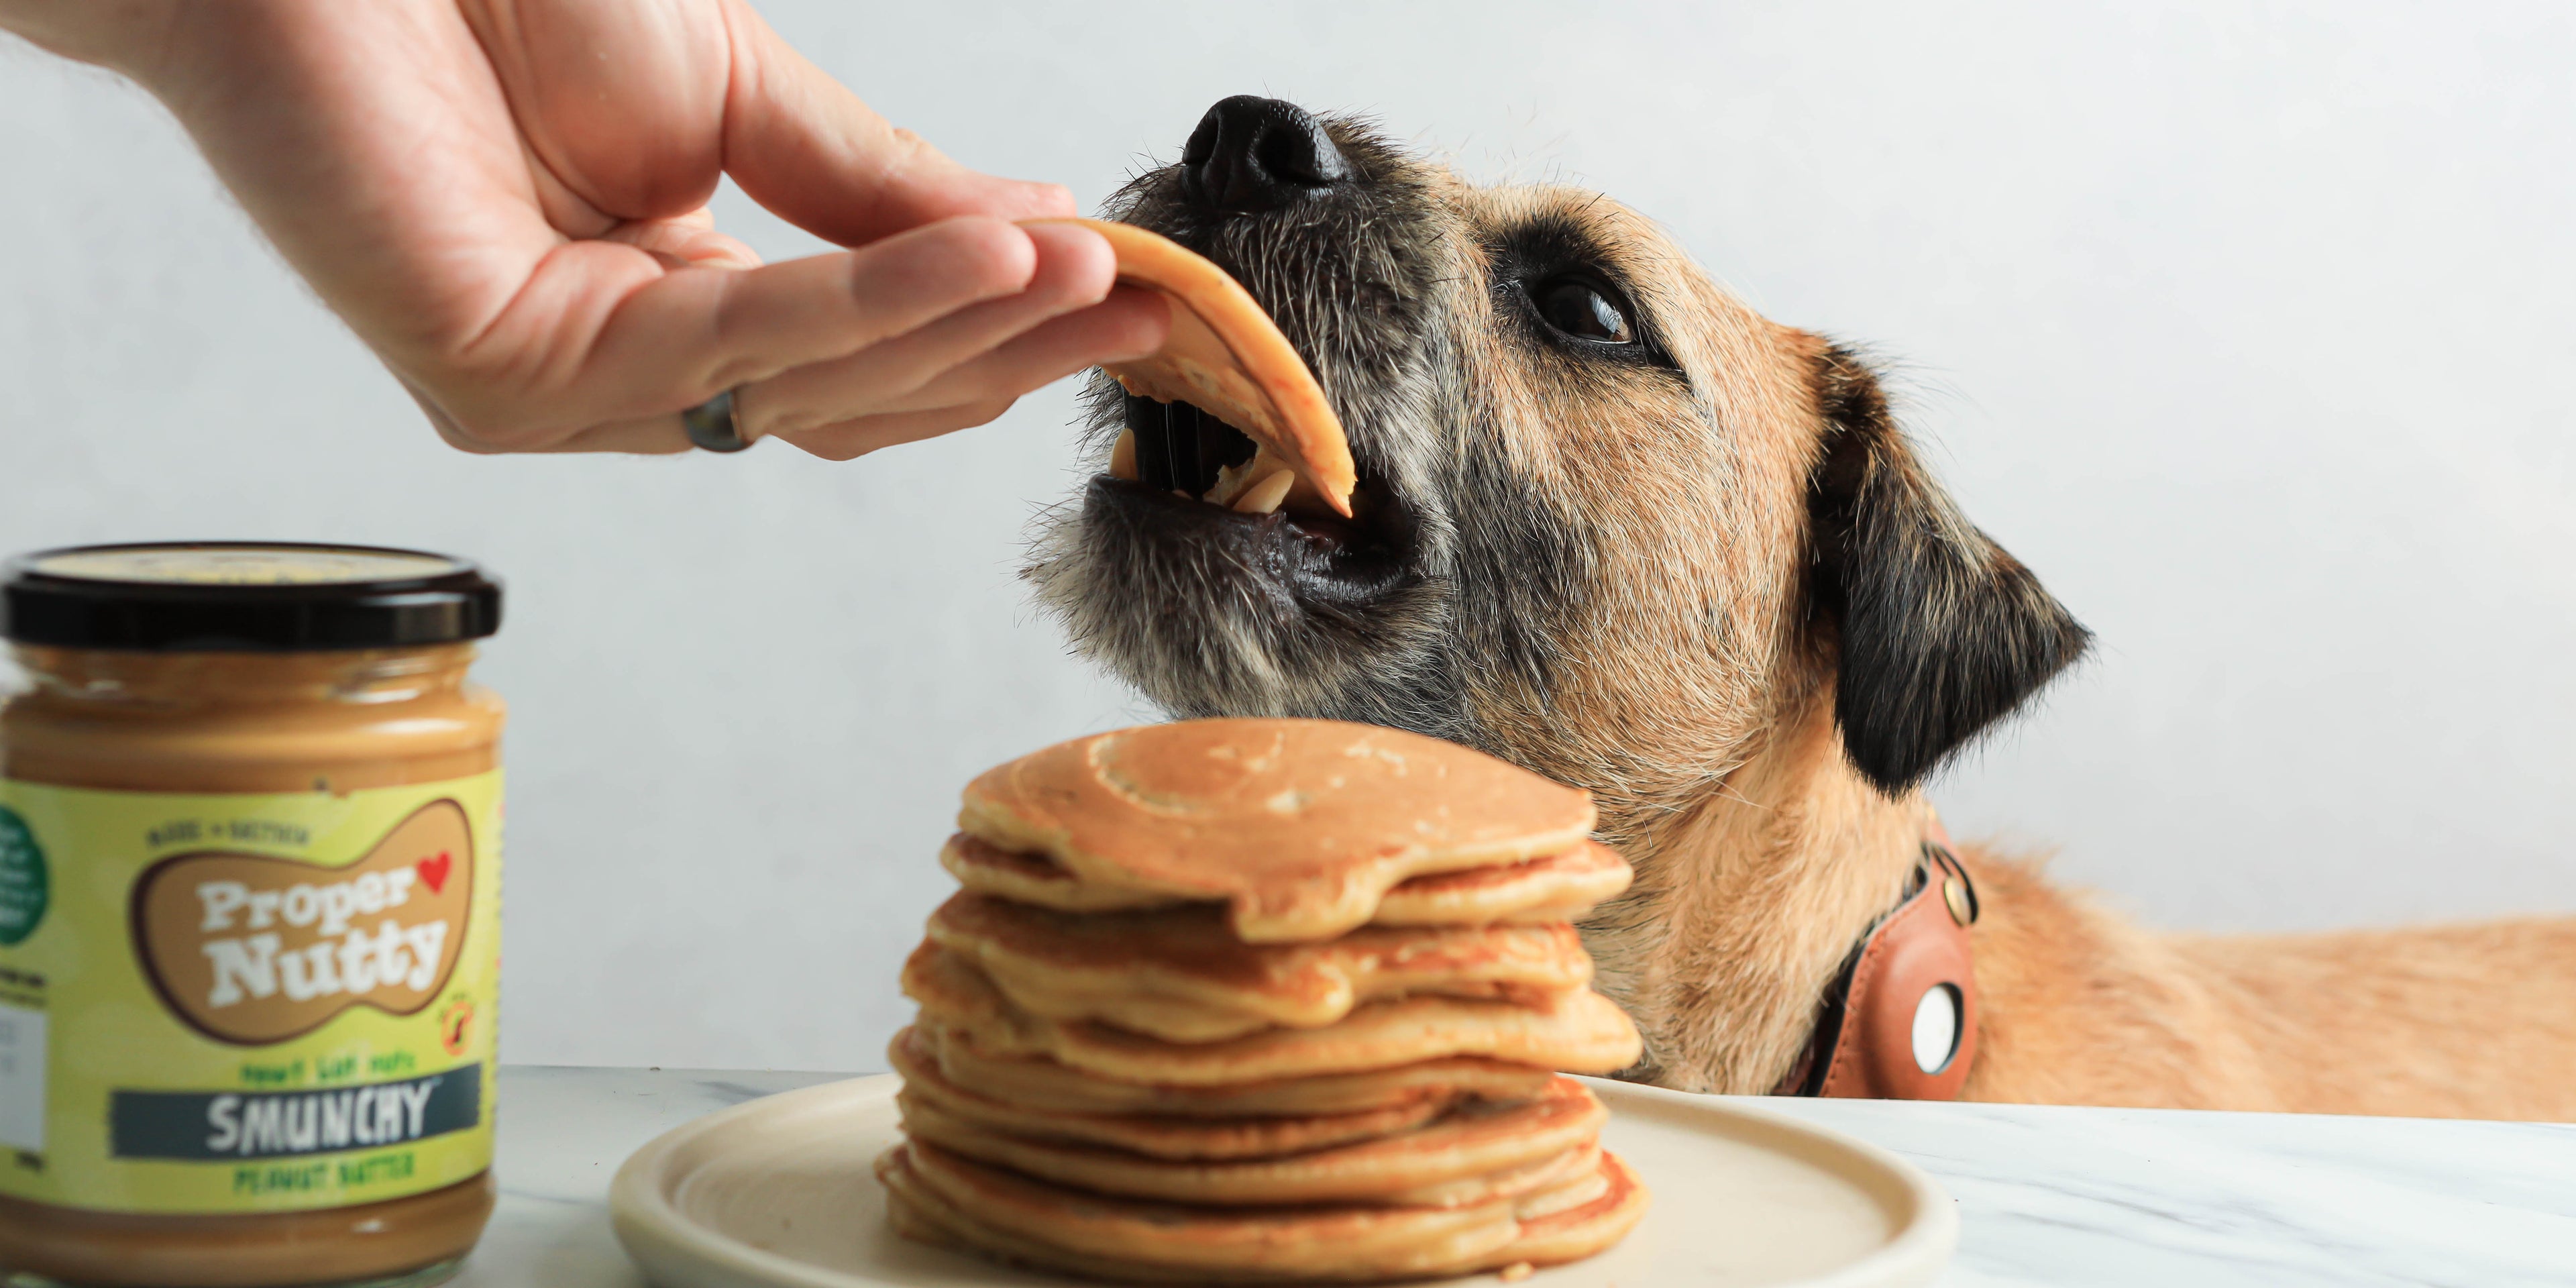 Hand feeding a small brown dog with black ears, a pancake from a stack of pancakes in the forefront, beside a jar of peanut butter. 